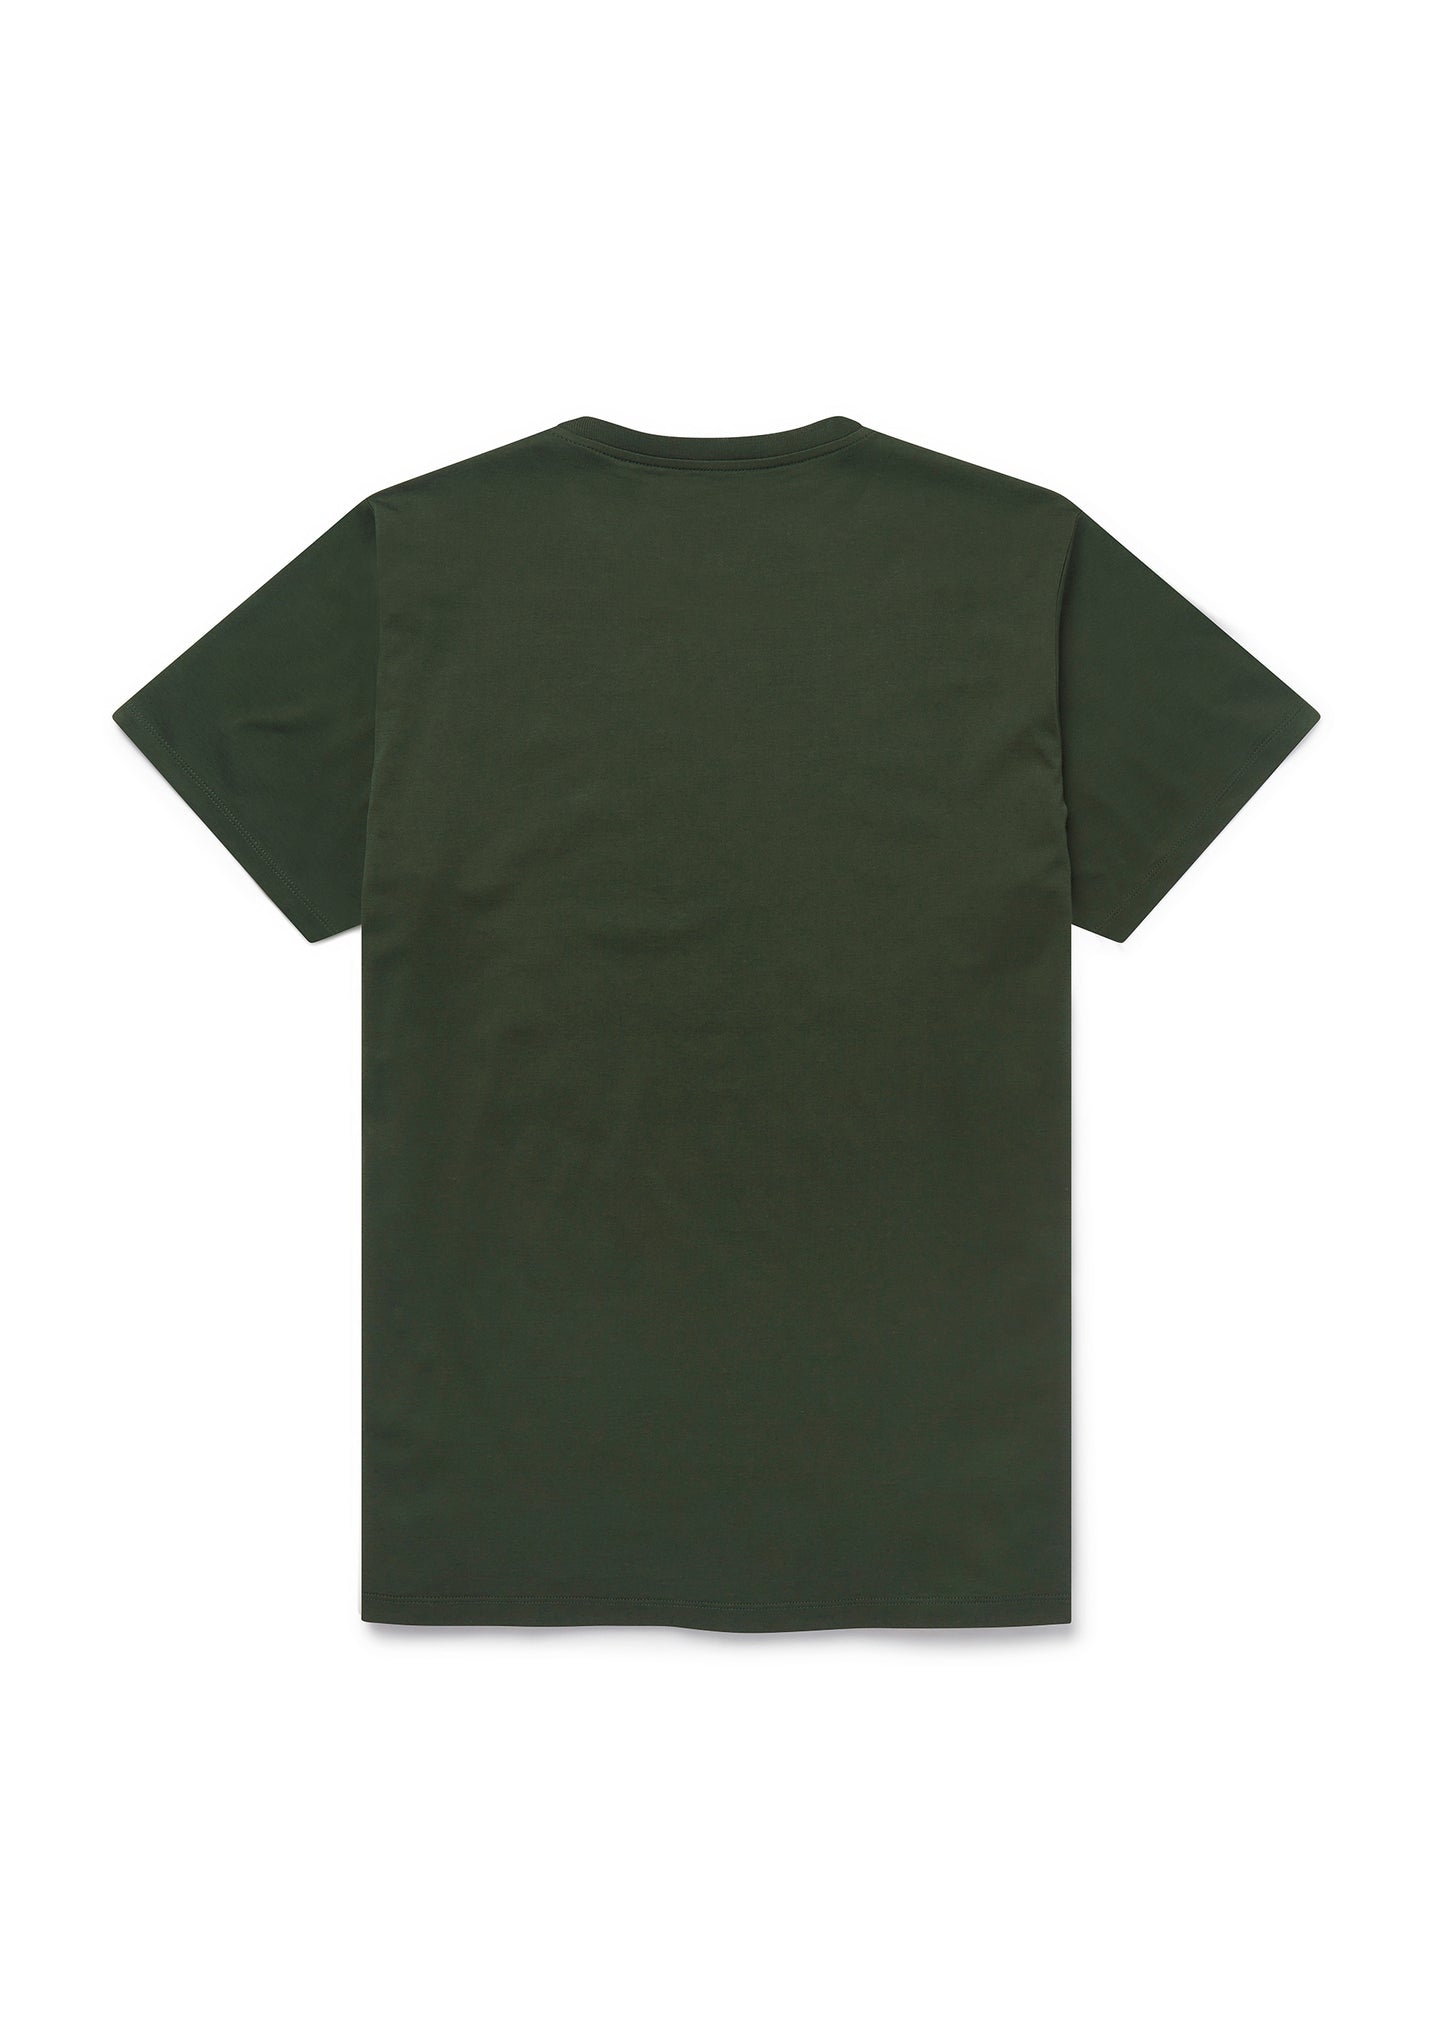 Classic T-Shirt in Forest